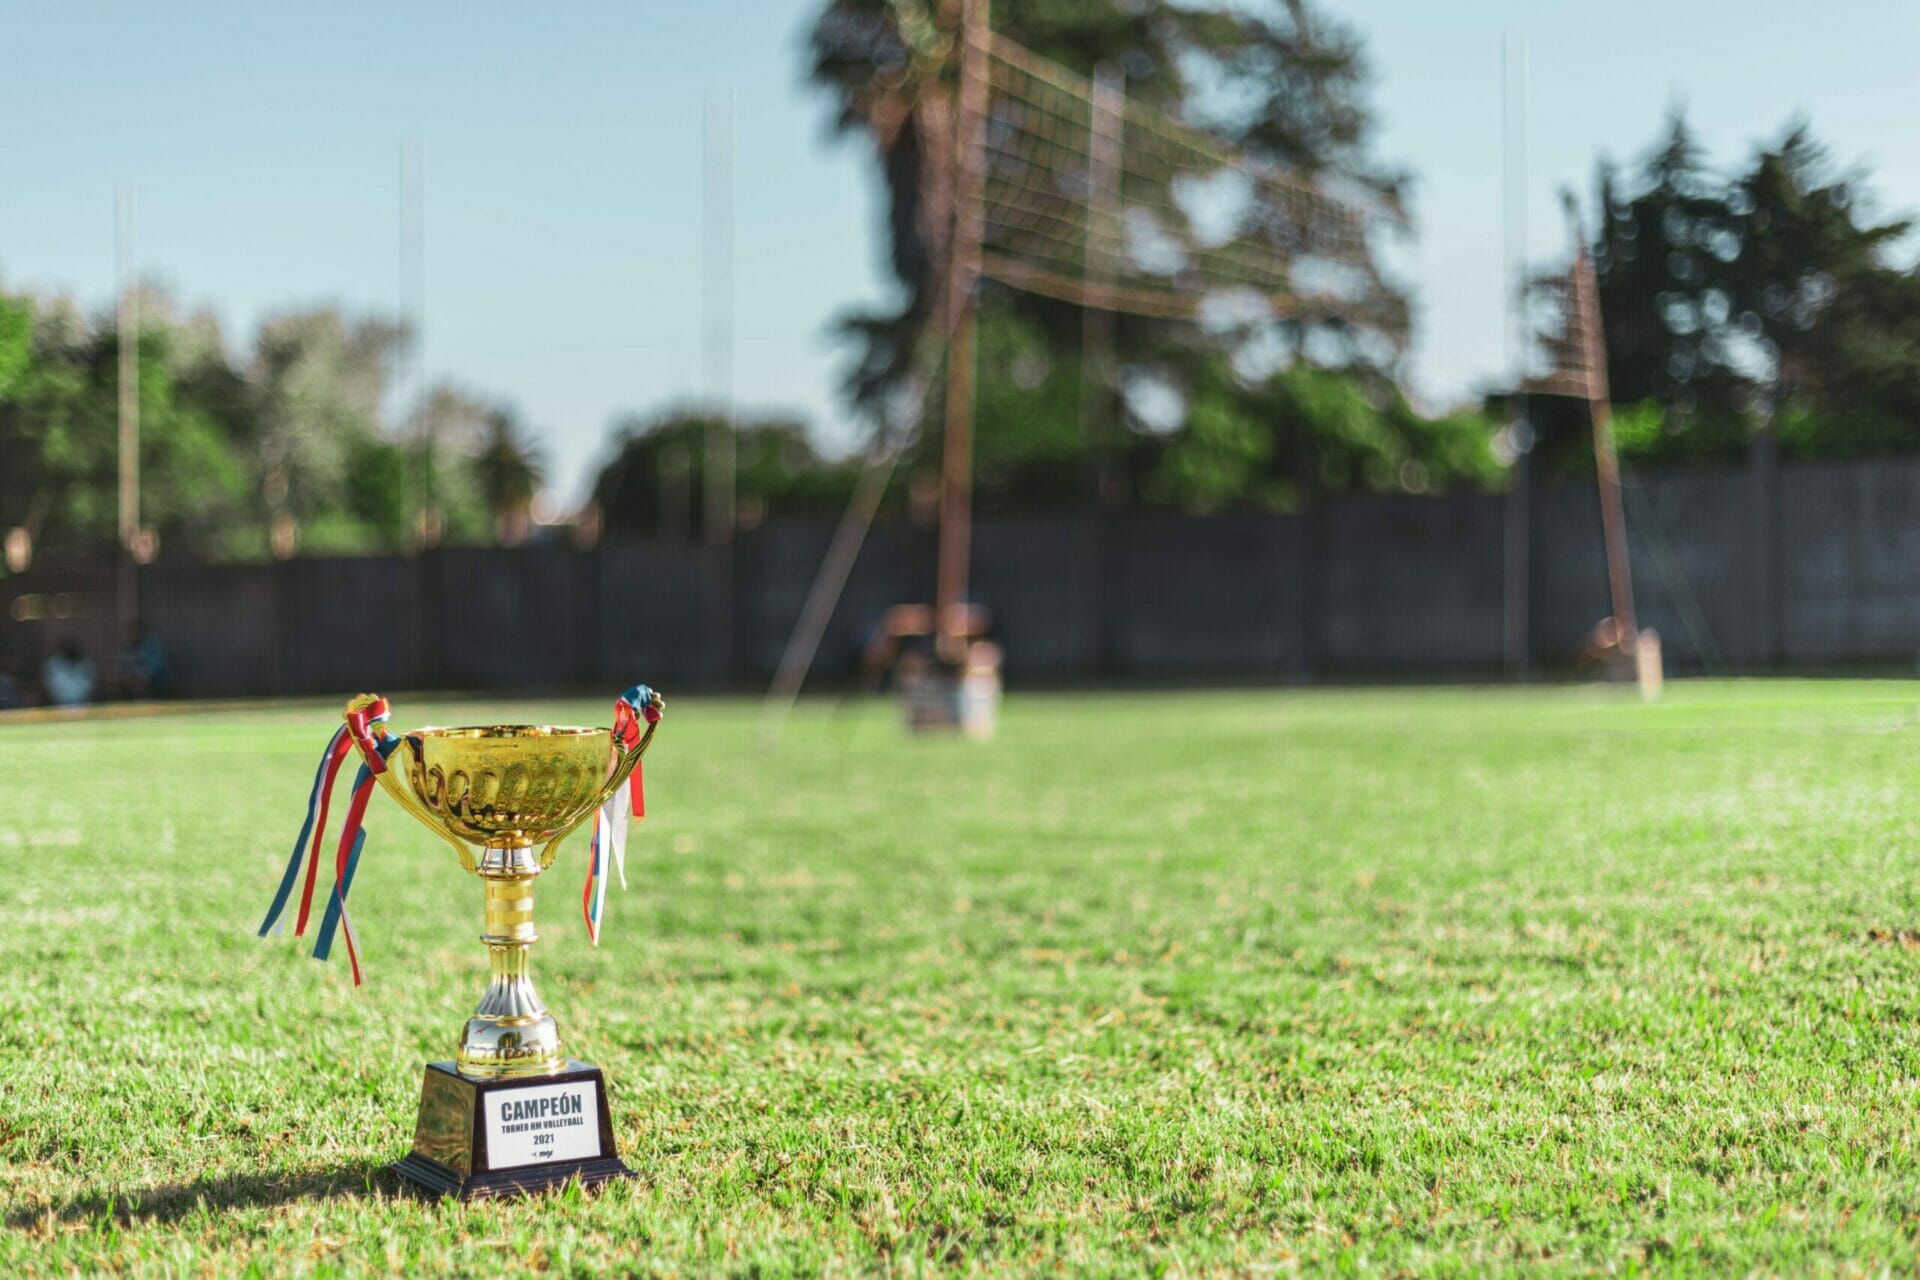 Trophy next to a Volley Ball Net - The Imposter Syndrome and Its Antidote